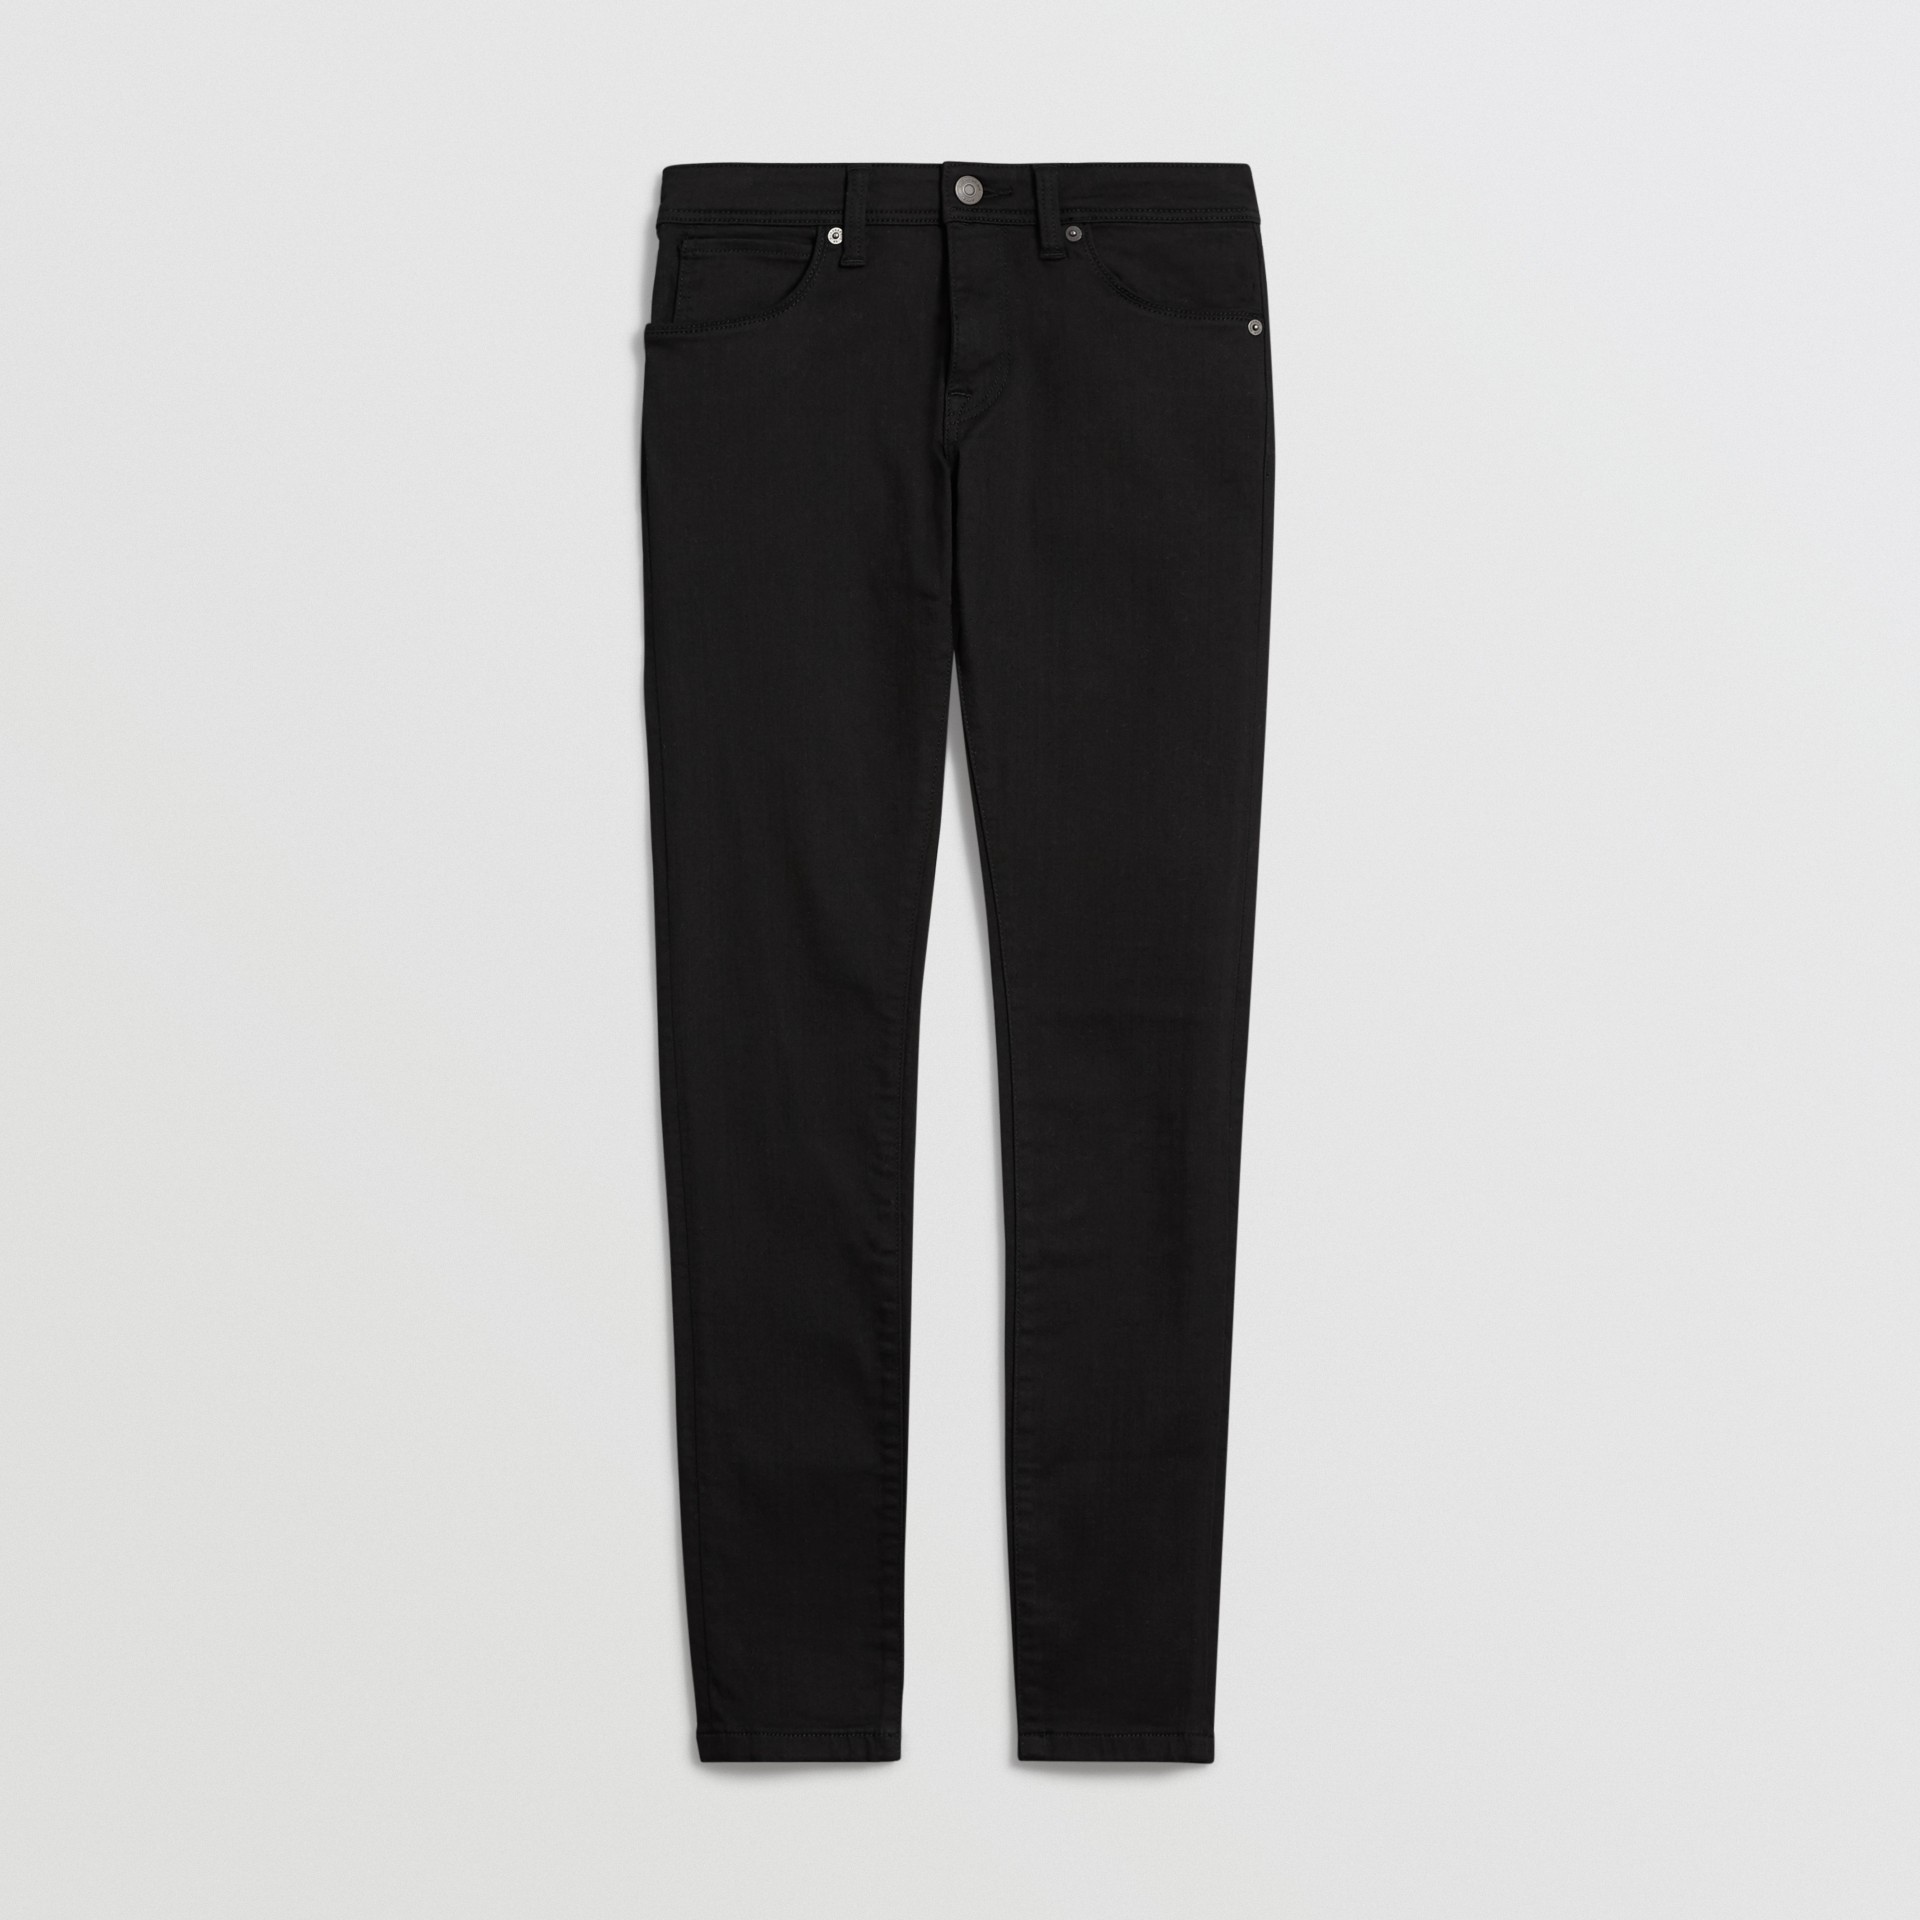 Skinny Fit Low-Rise Deep Black Jeans - Women | Burberry United States